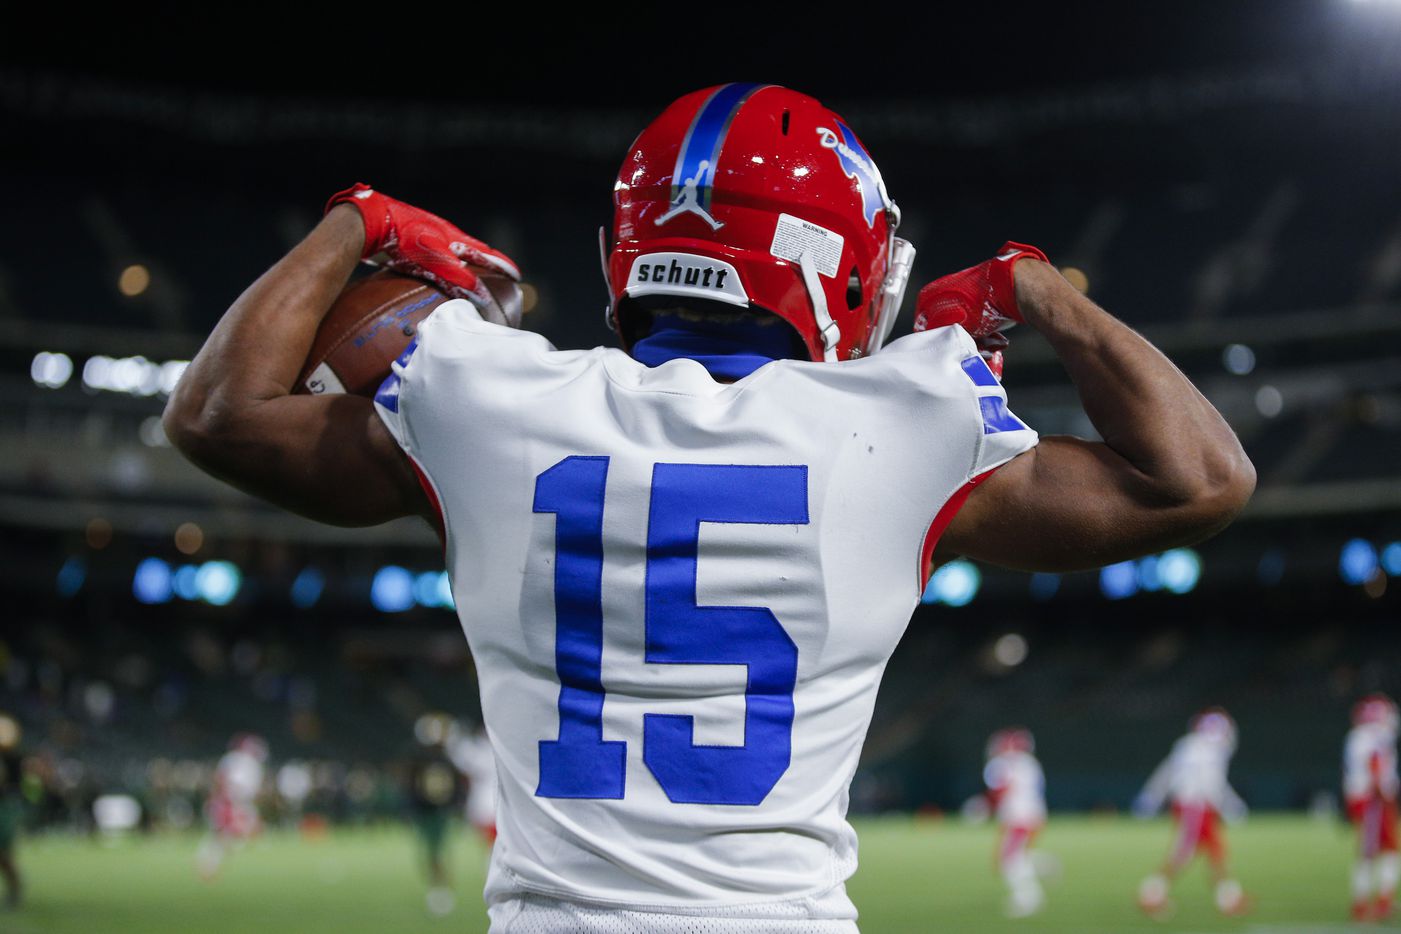 Duncanville senior running back Keyon Pugh (15) celebrates scoring a touchdown during the first half of a Class 6A Division I Region II final high school football game against DeSoto, Saturday, January 2, 2021.  Duncanville won 56-28. (Brandon Wade/Special Contributor)